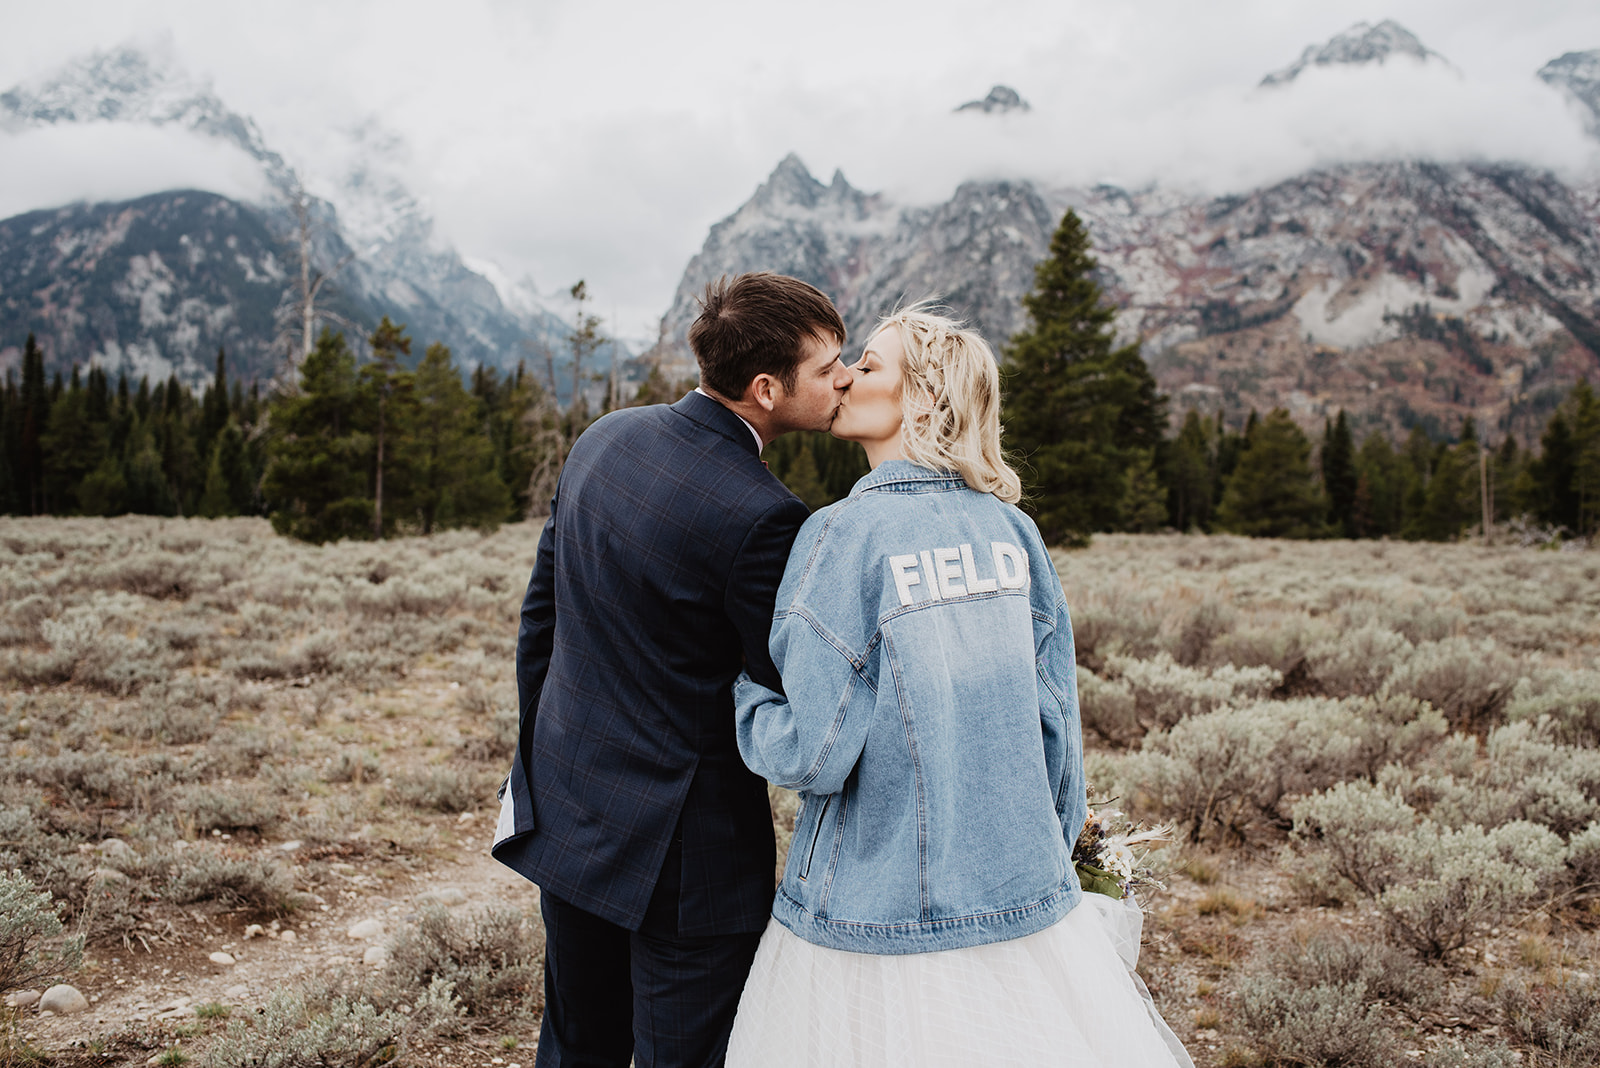 bride kisses her groom in front of the Tetons in Jackson Hole while wearing a jean jacket that says "bride" on the back in white lettering